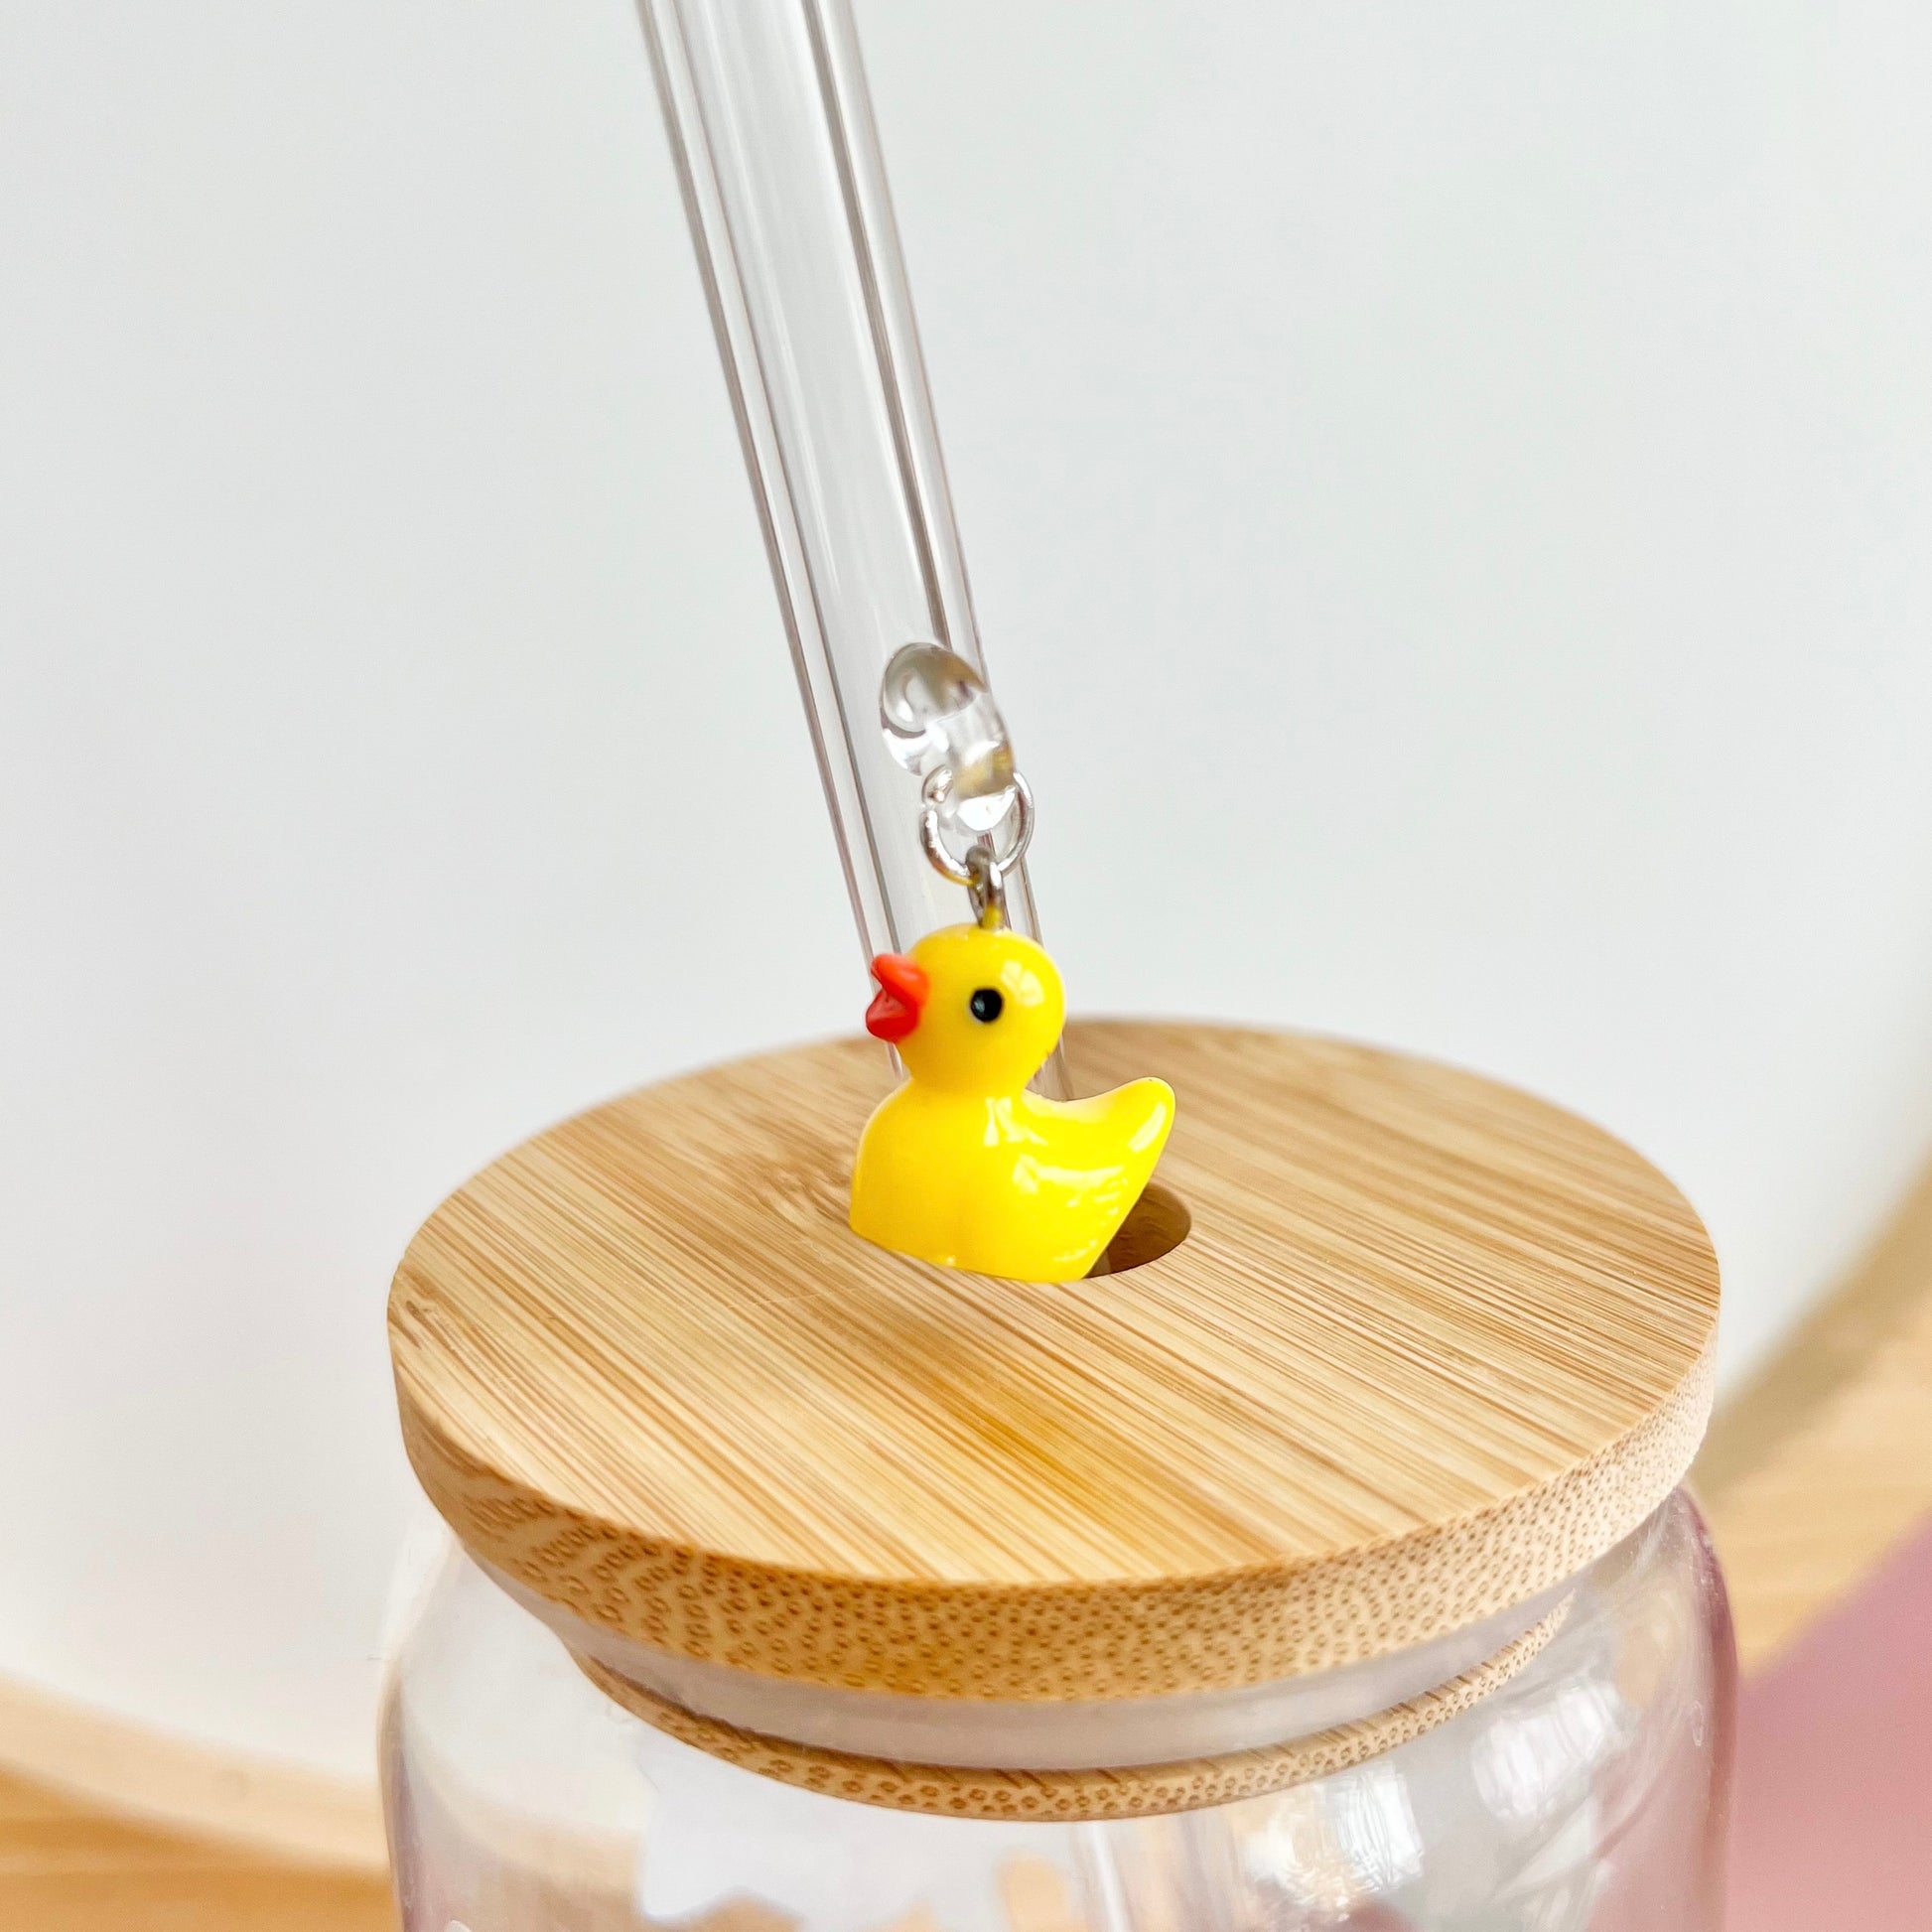 Straw Cover Duck